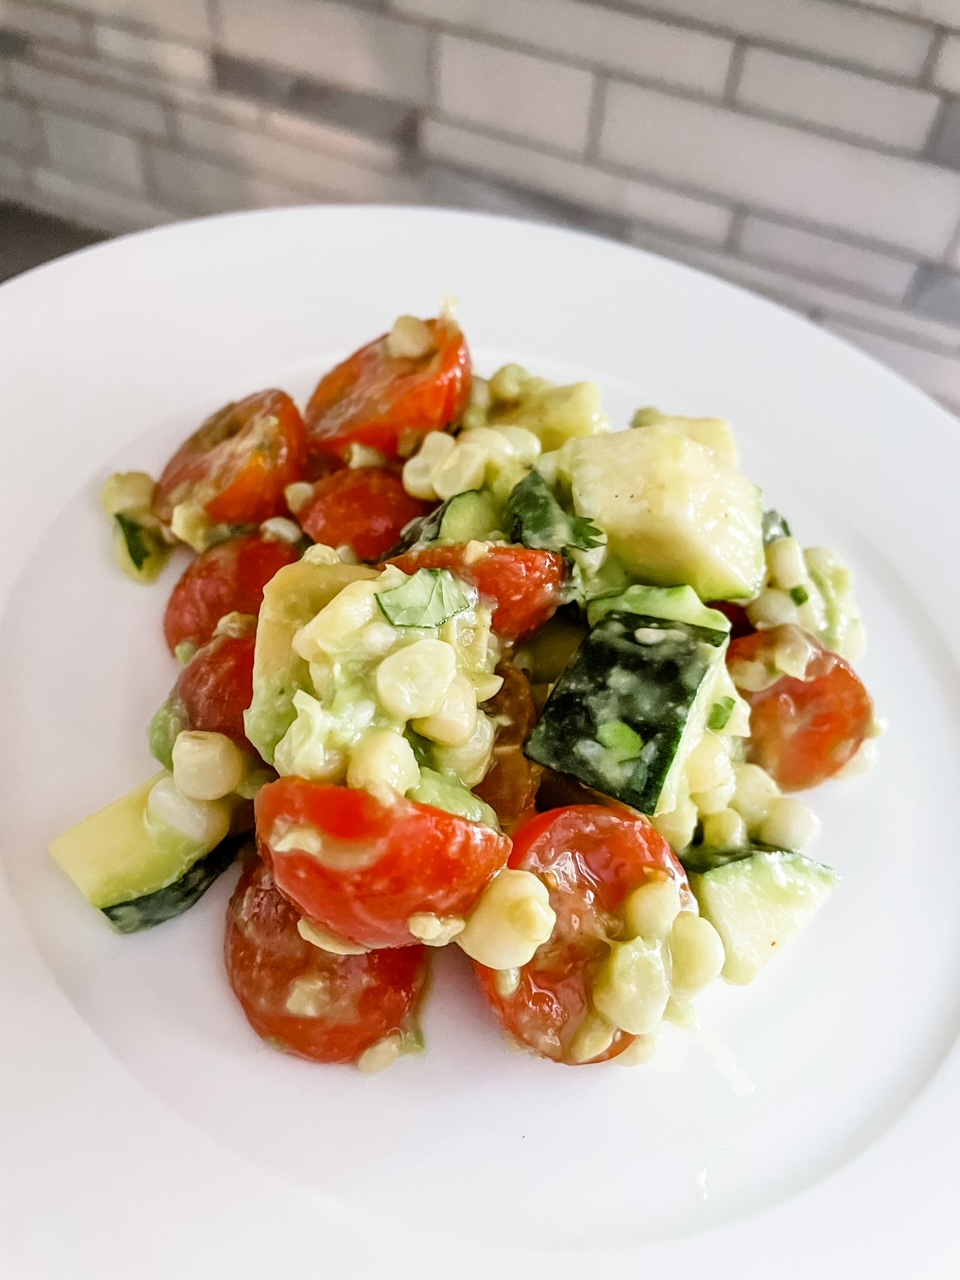 A serving of the Corn and Zucchini Salad with Avocado Dressing on a white plate